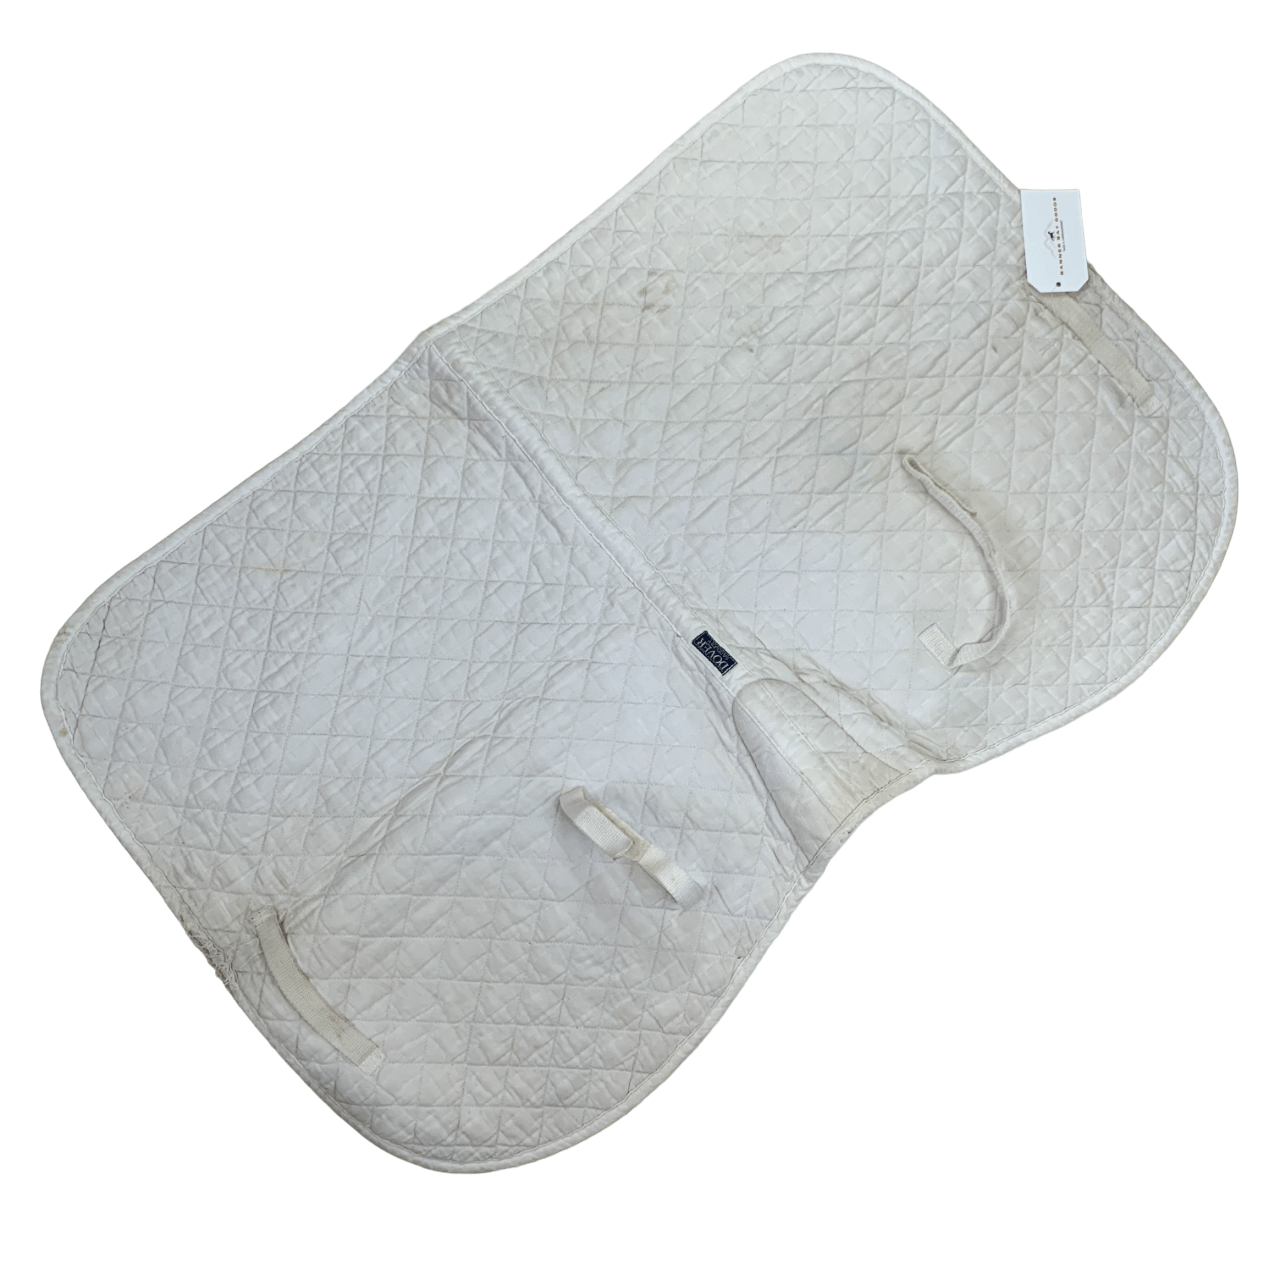 Dover Saddlery A/P Schooling Pad